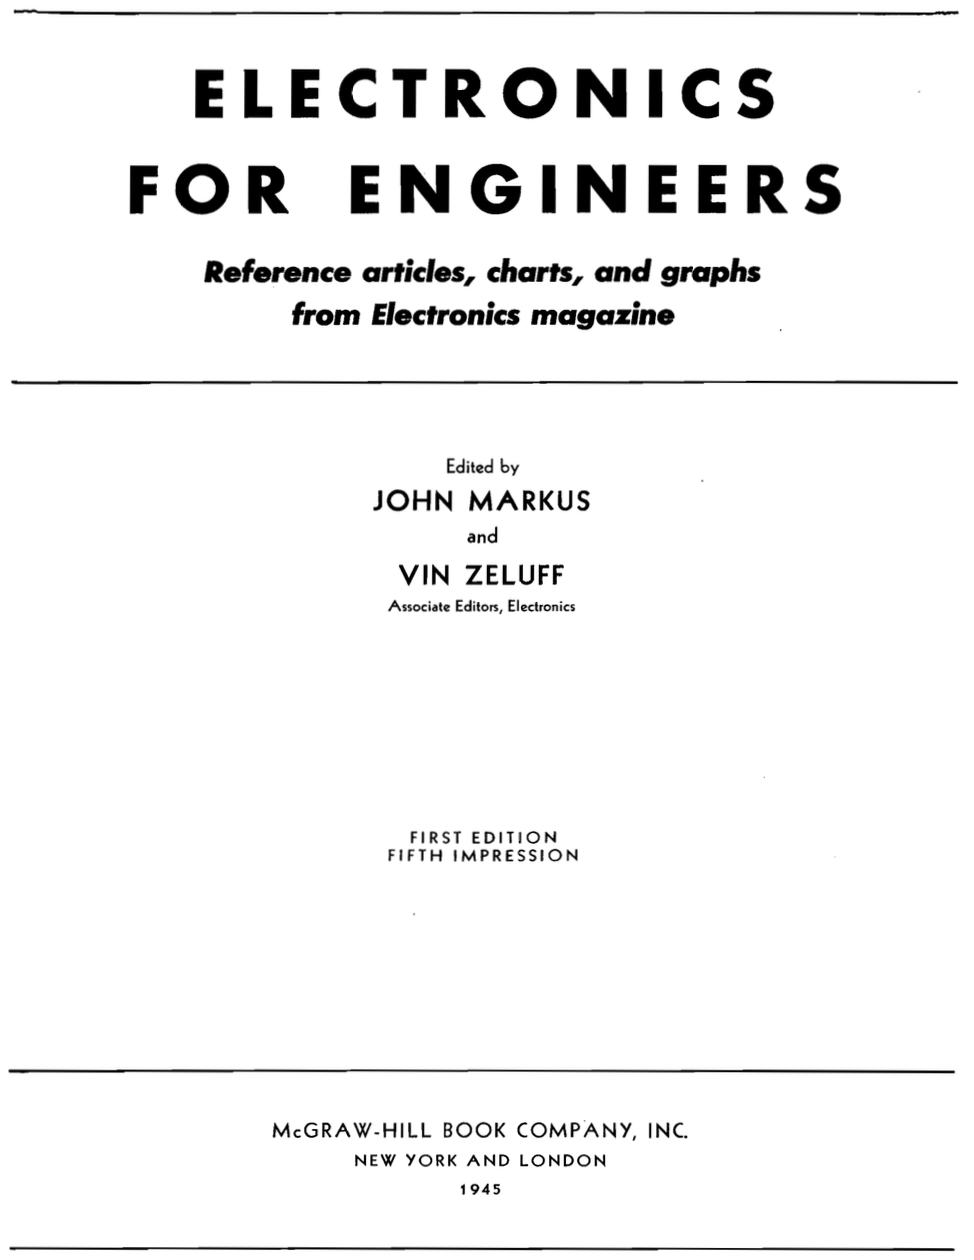 Electronics for Engineers (1st Edition, 1945)